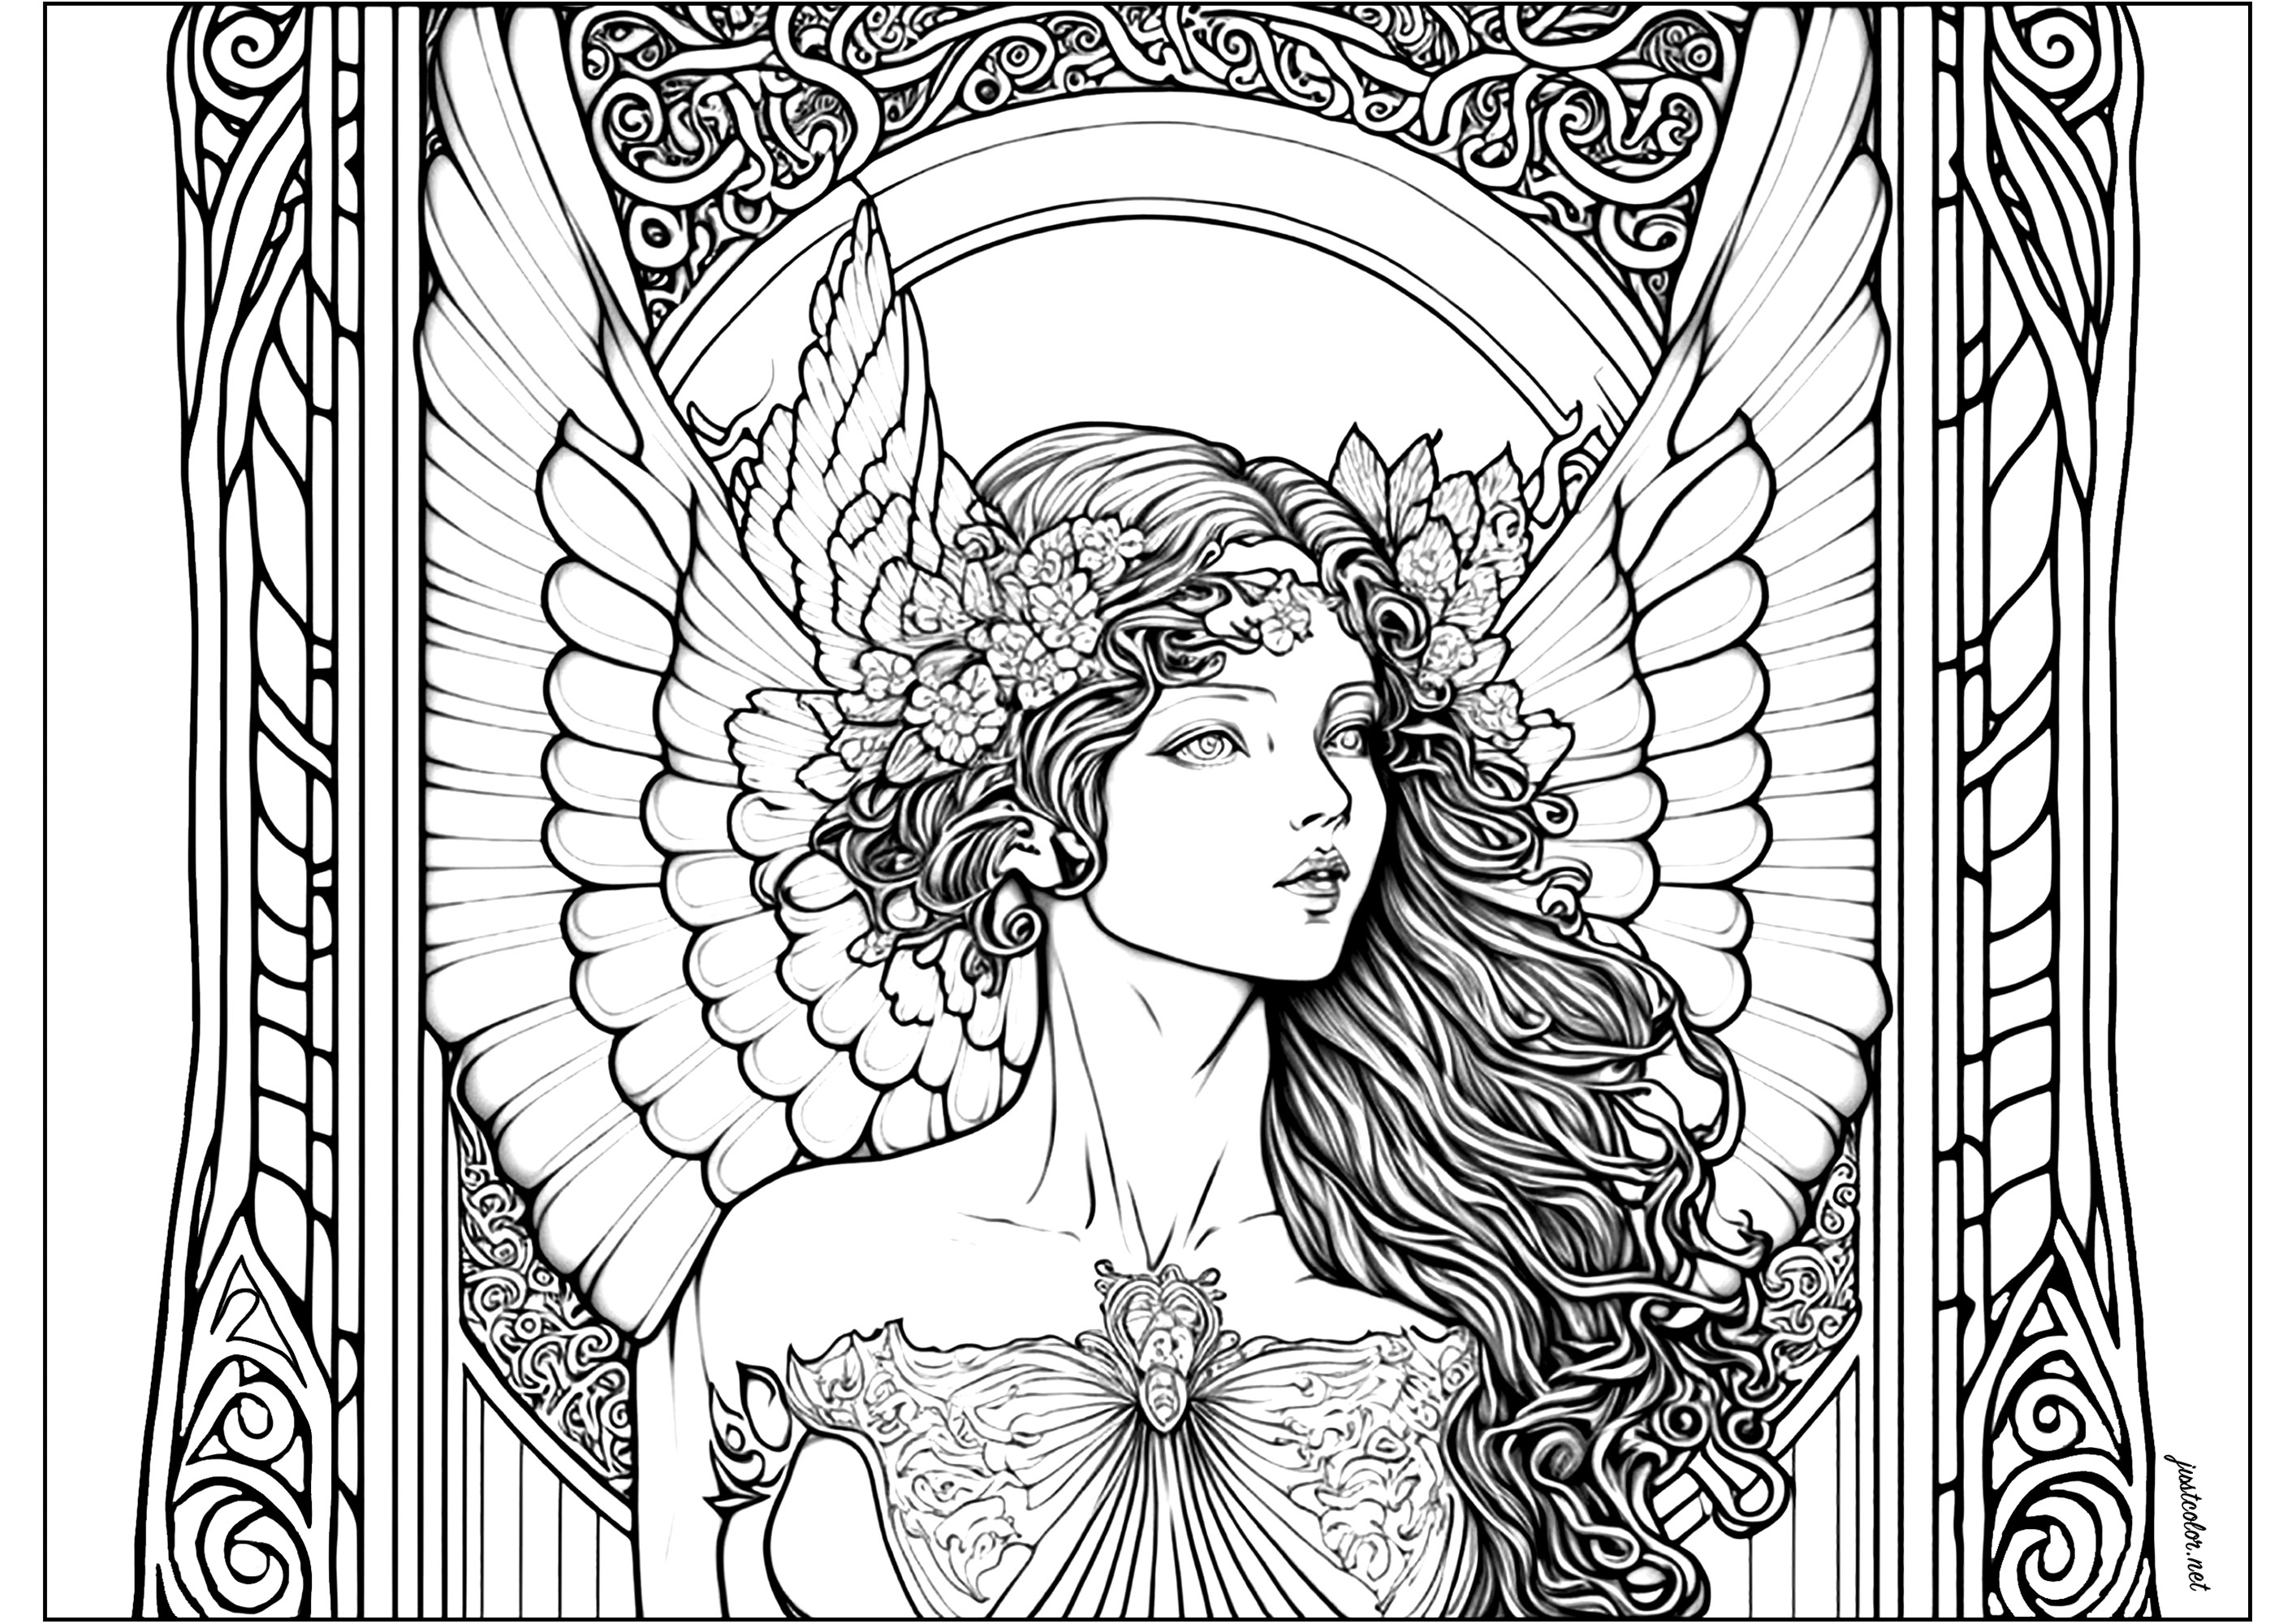 Beautiful winged woman. A beautiful winged woman, with motifs freely inspired by the Art Nouveau style. The contours are delicate and detailed, the look of the character inspires contemplation and letting go.